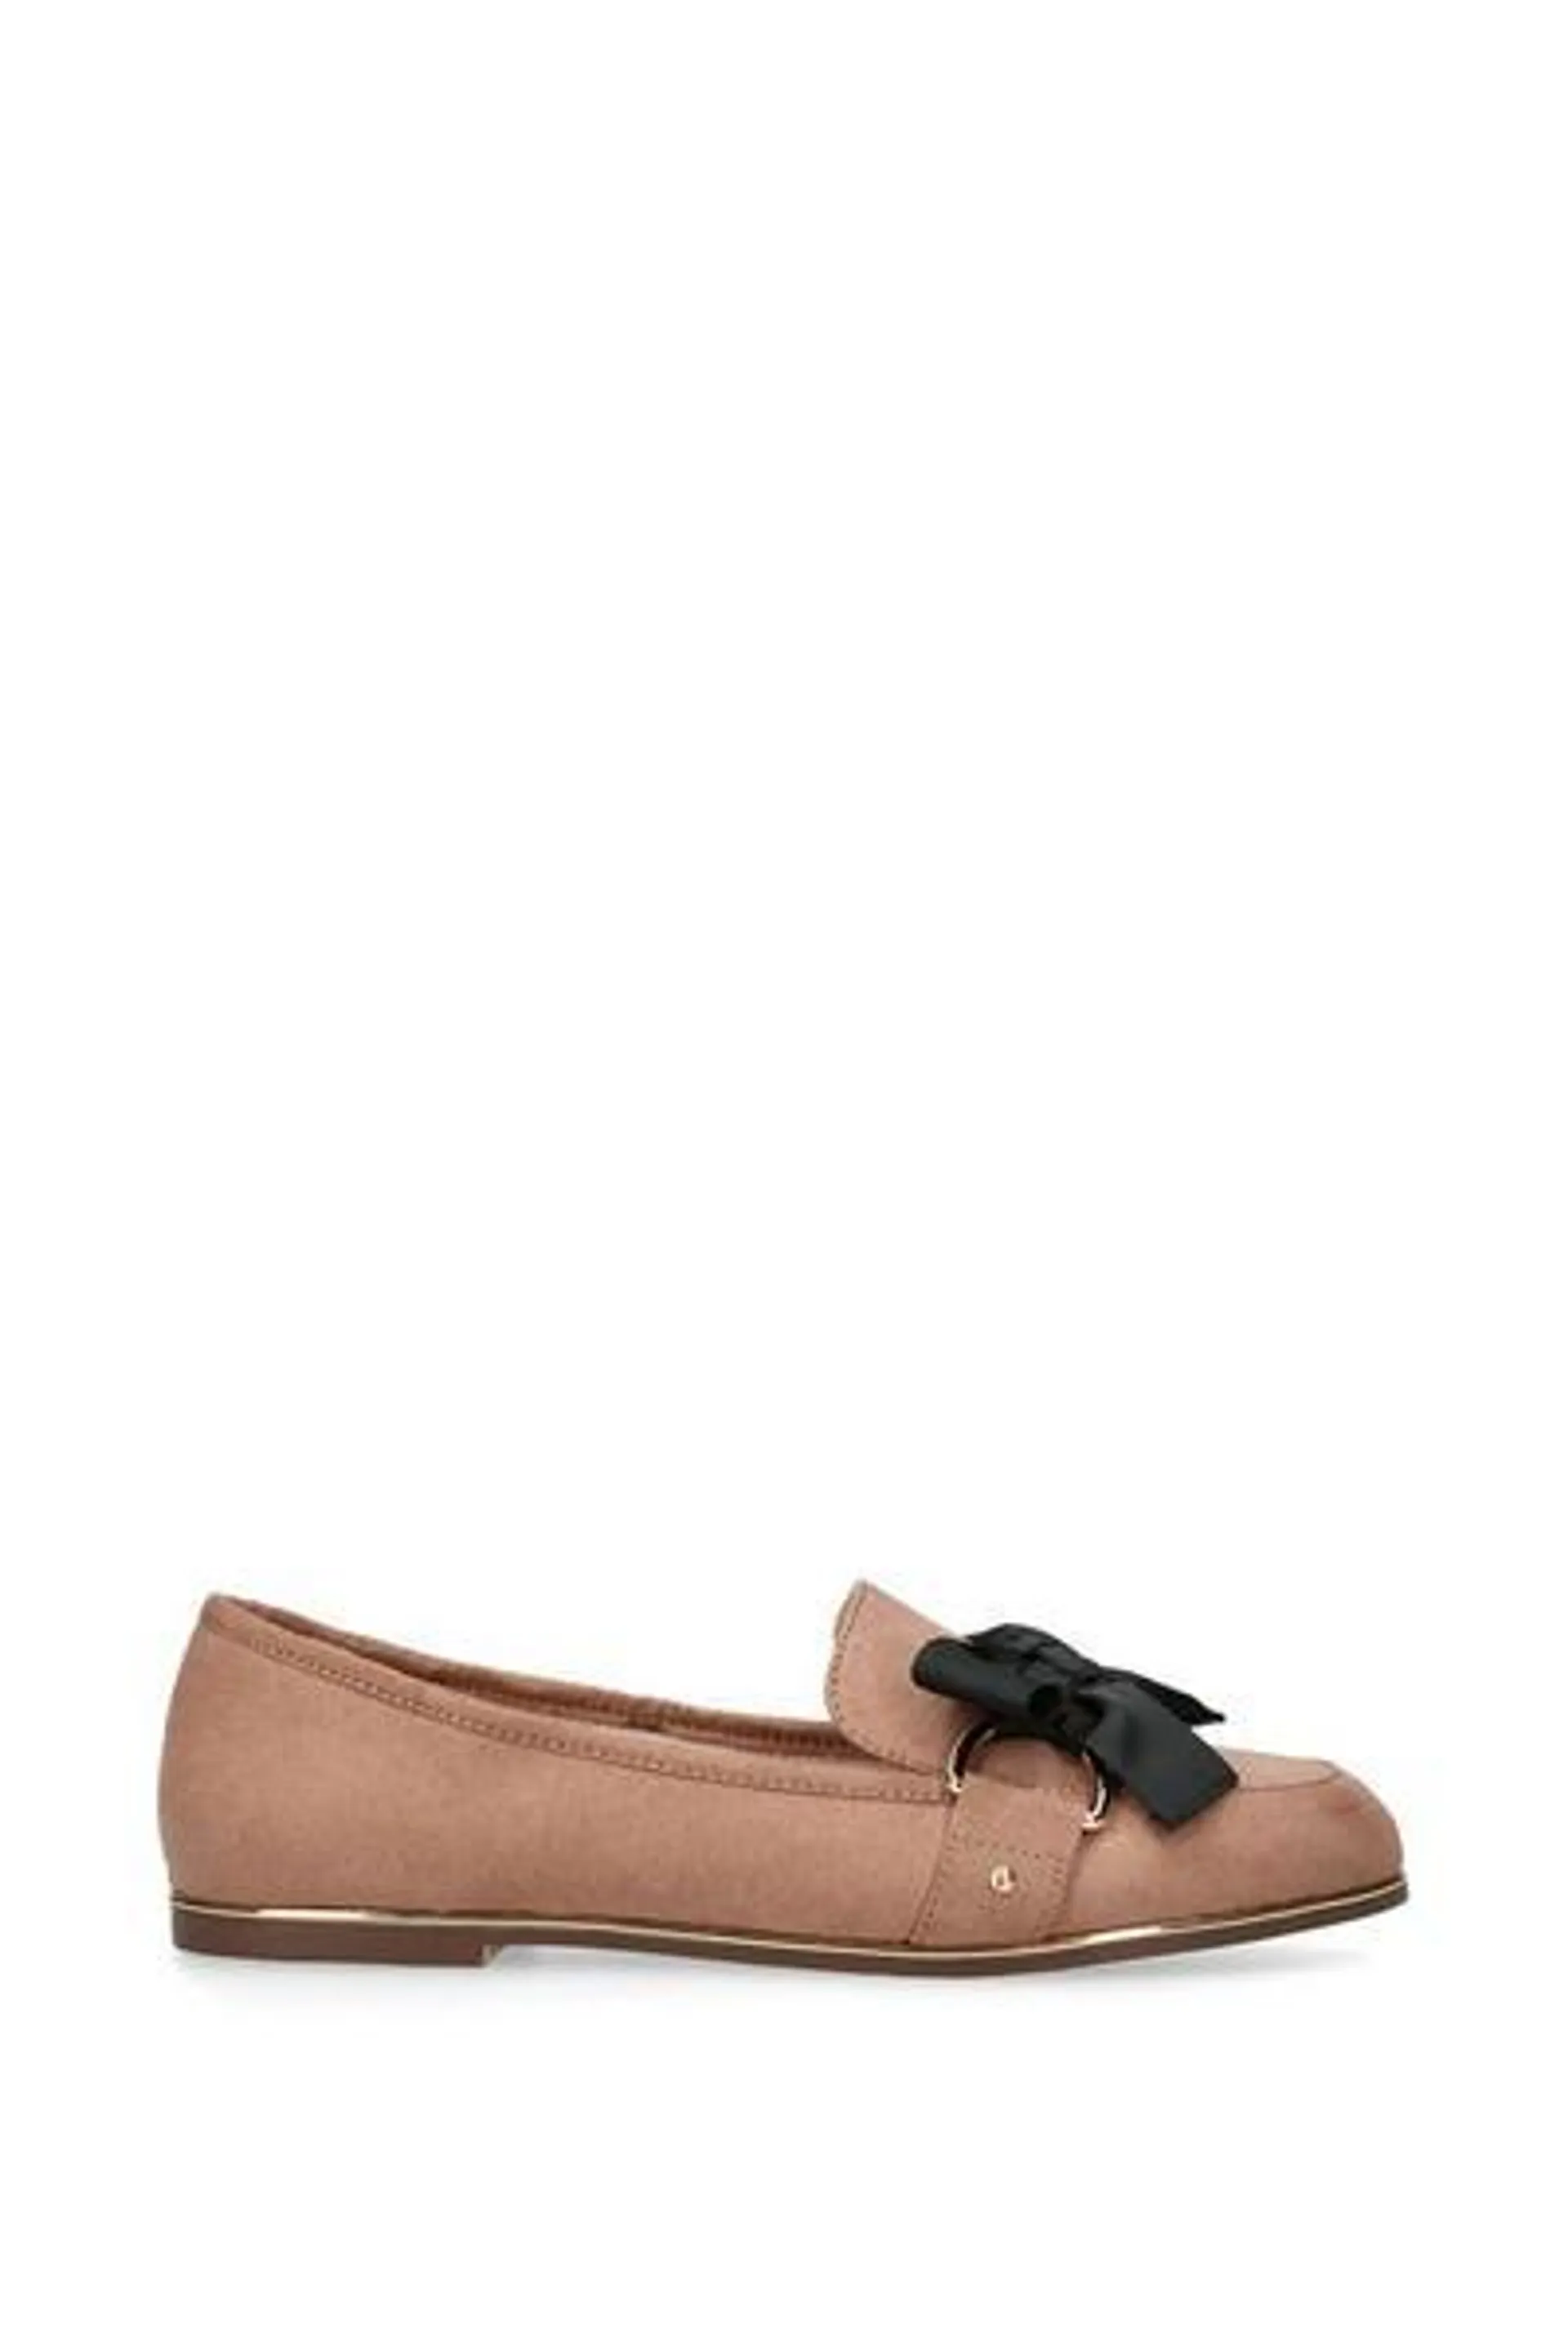 'Mable3' Suedette Flats